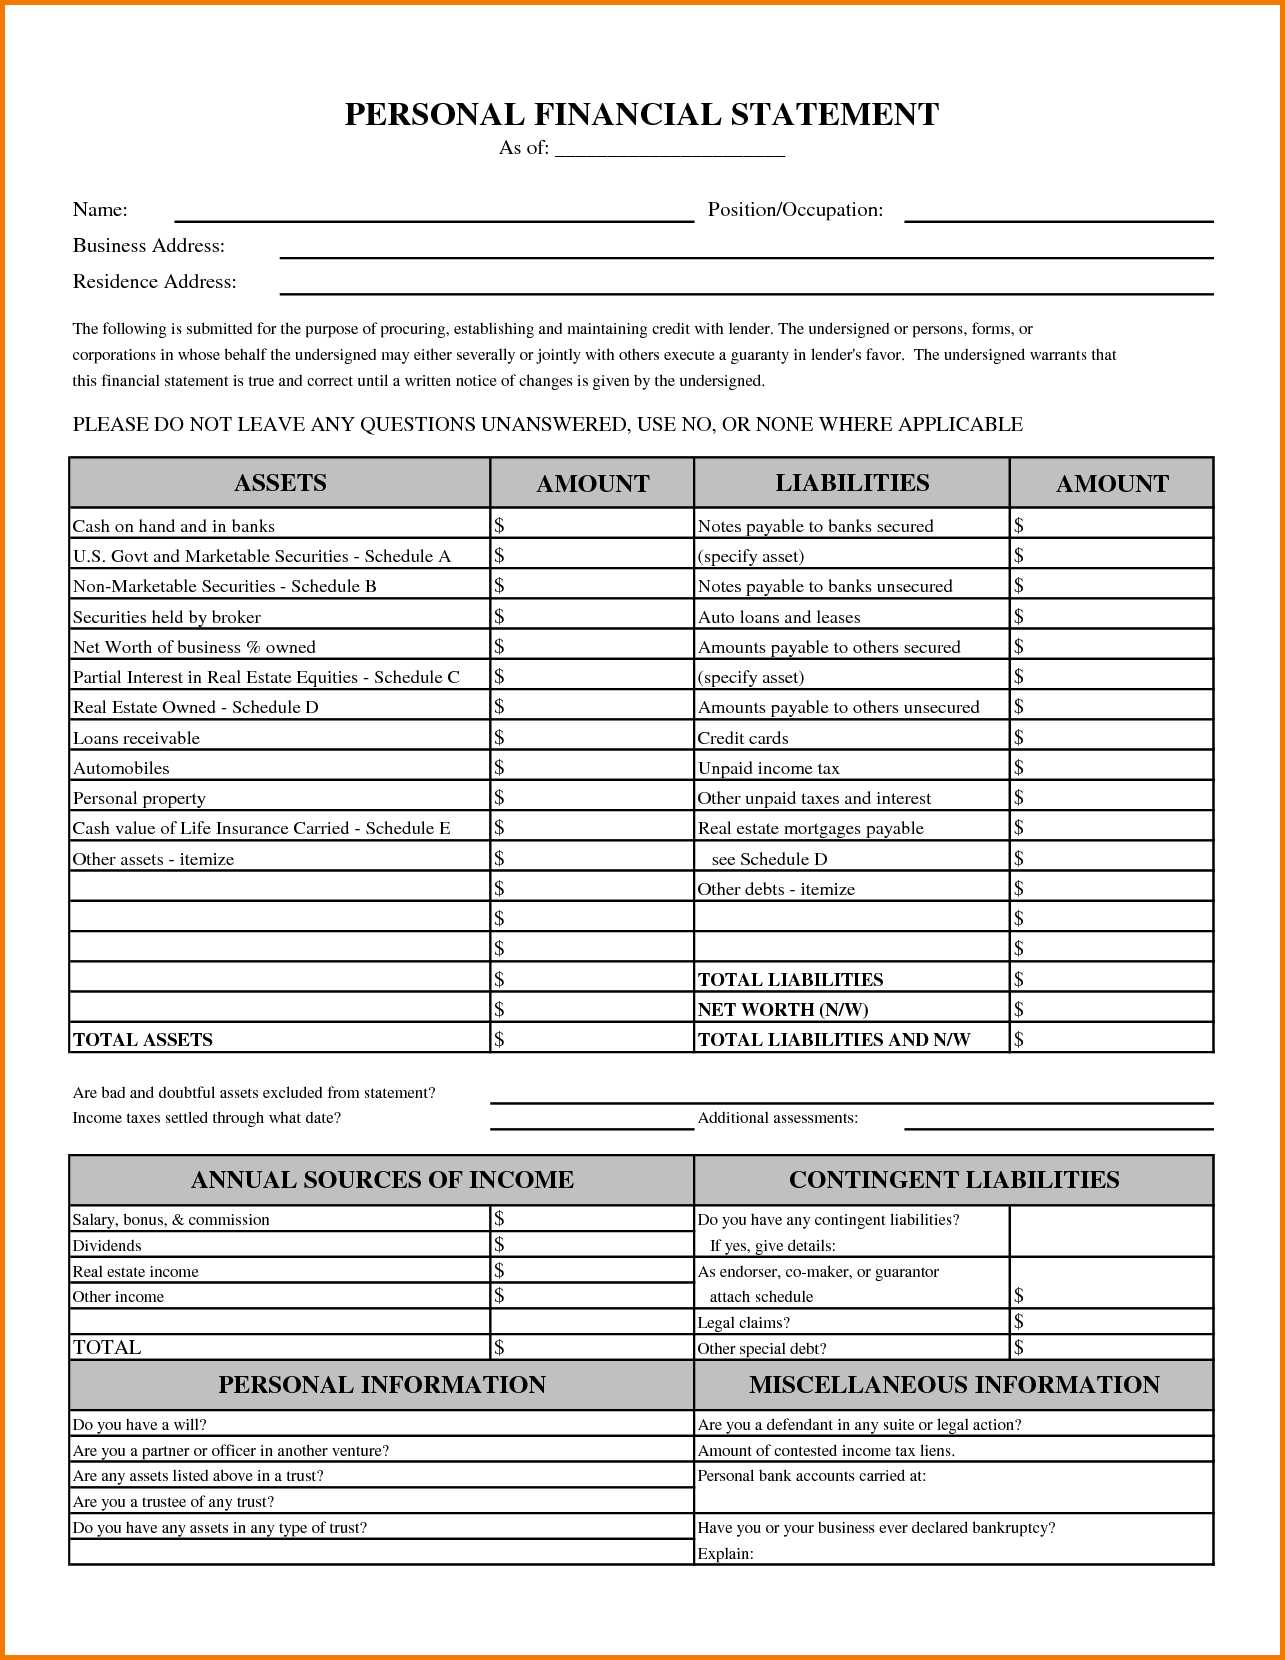 023 Sba Personal Financial Statement Template Excel Fresh Inside Blank Personal Financial Statement Template